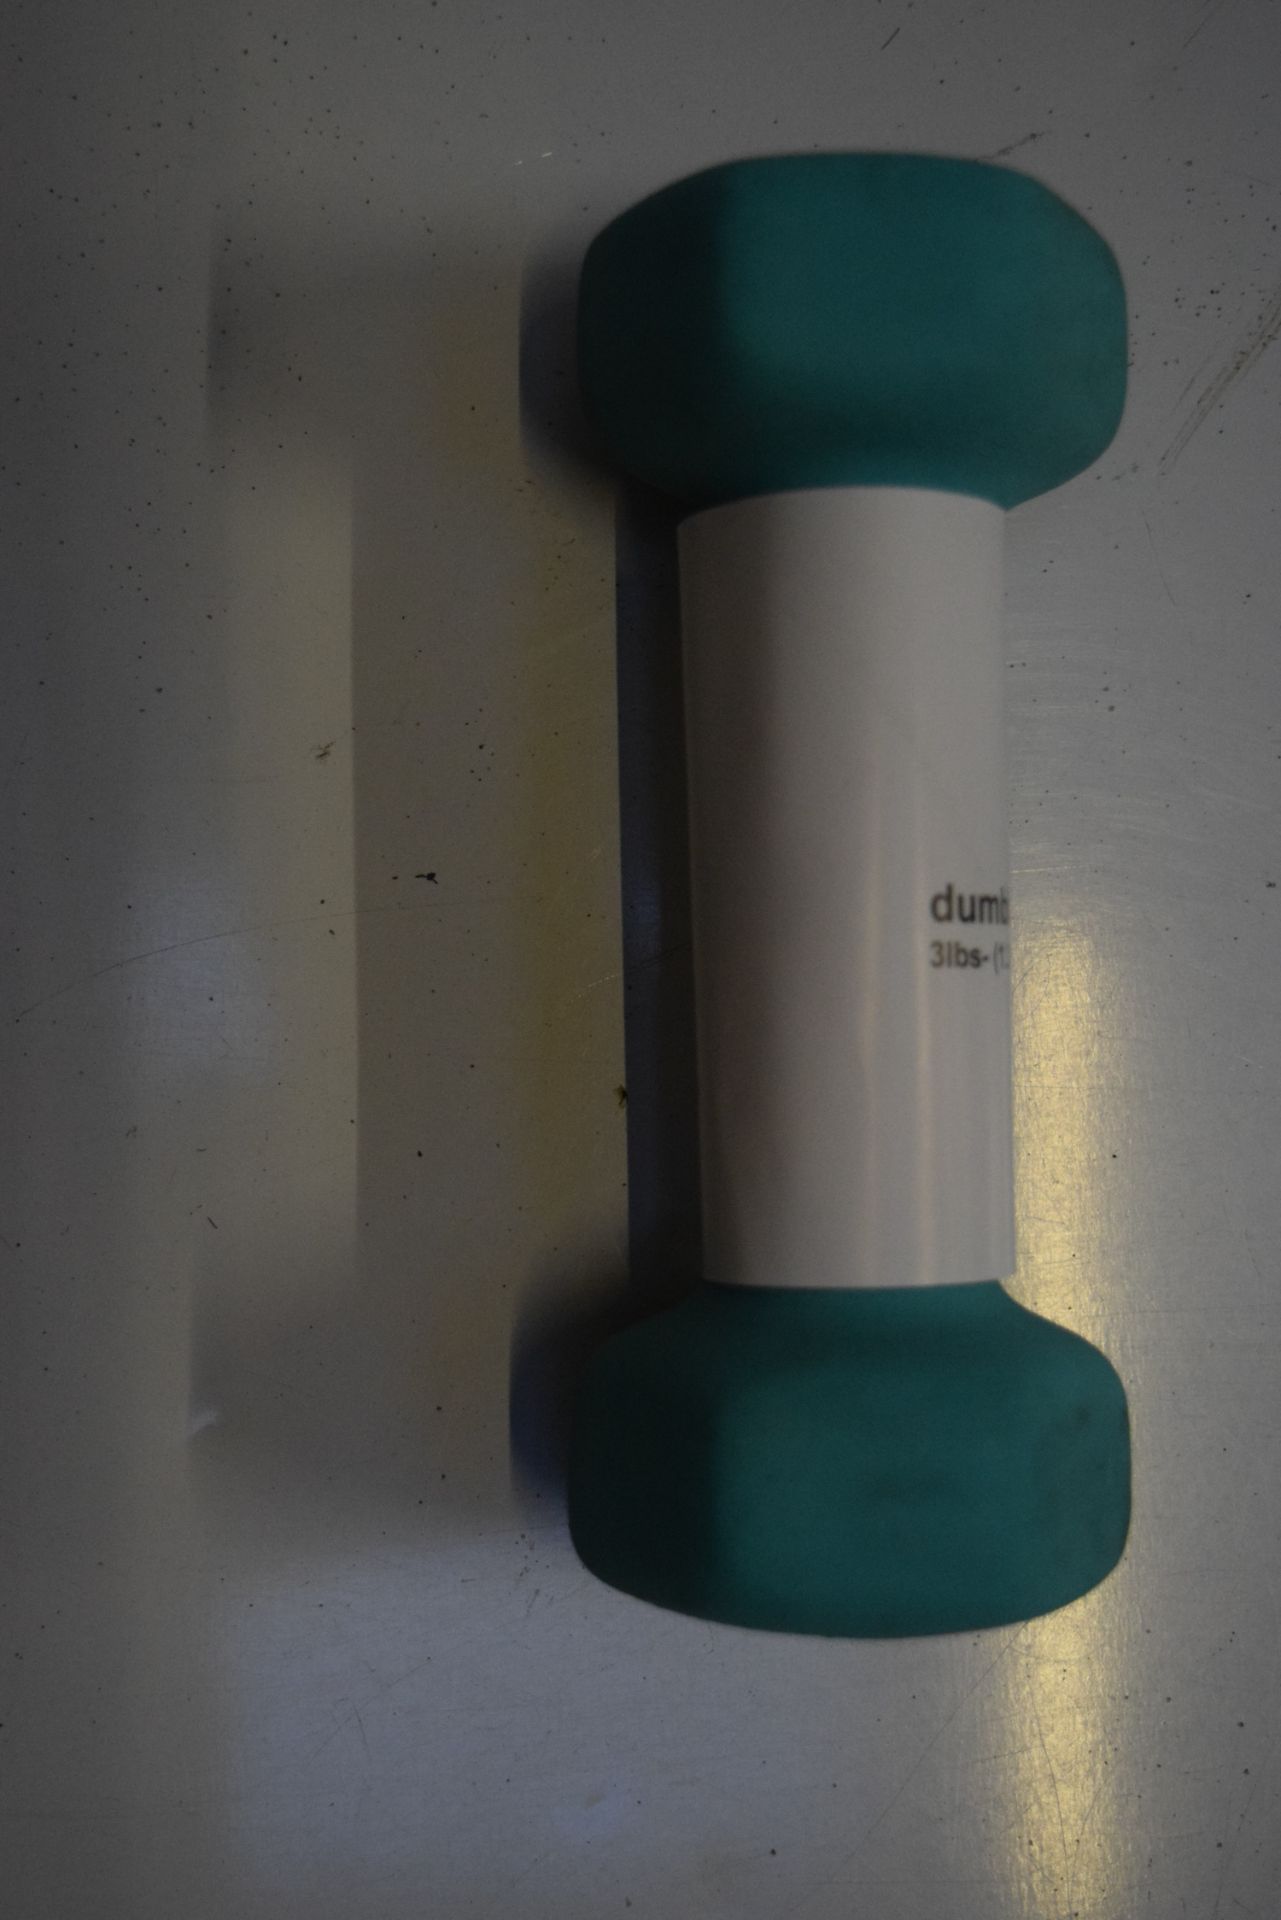 8 x 1.36KG DUMBELLS RRP £3 EACH 23/08/17 *PLEASE NOTE THAT THE BID PRICE IS MULTIPLIED BY THE NUMBER